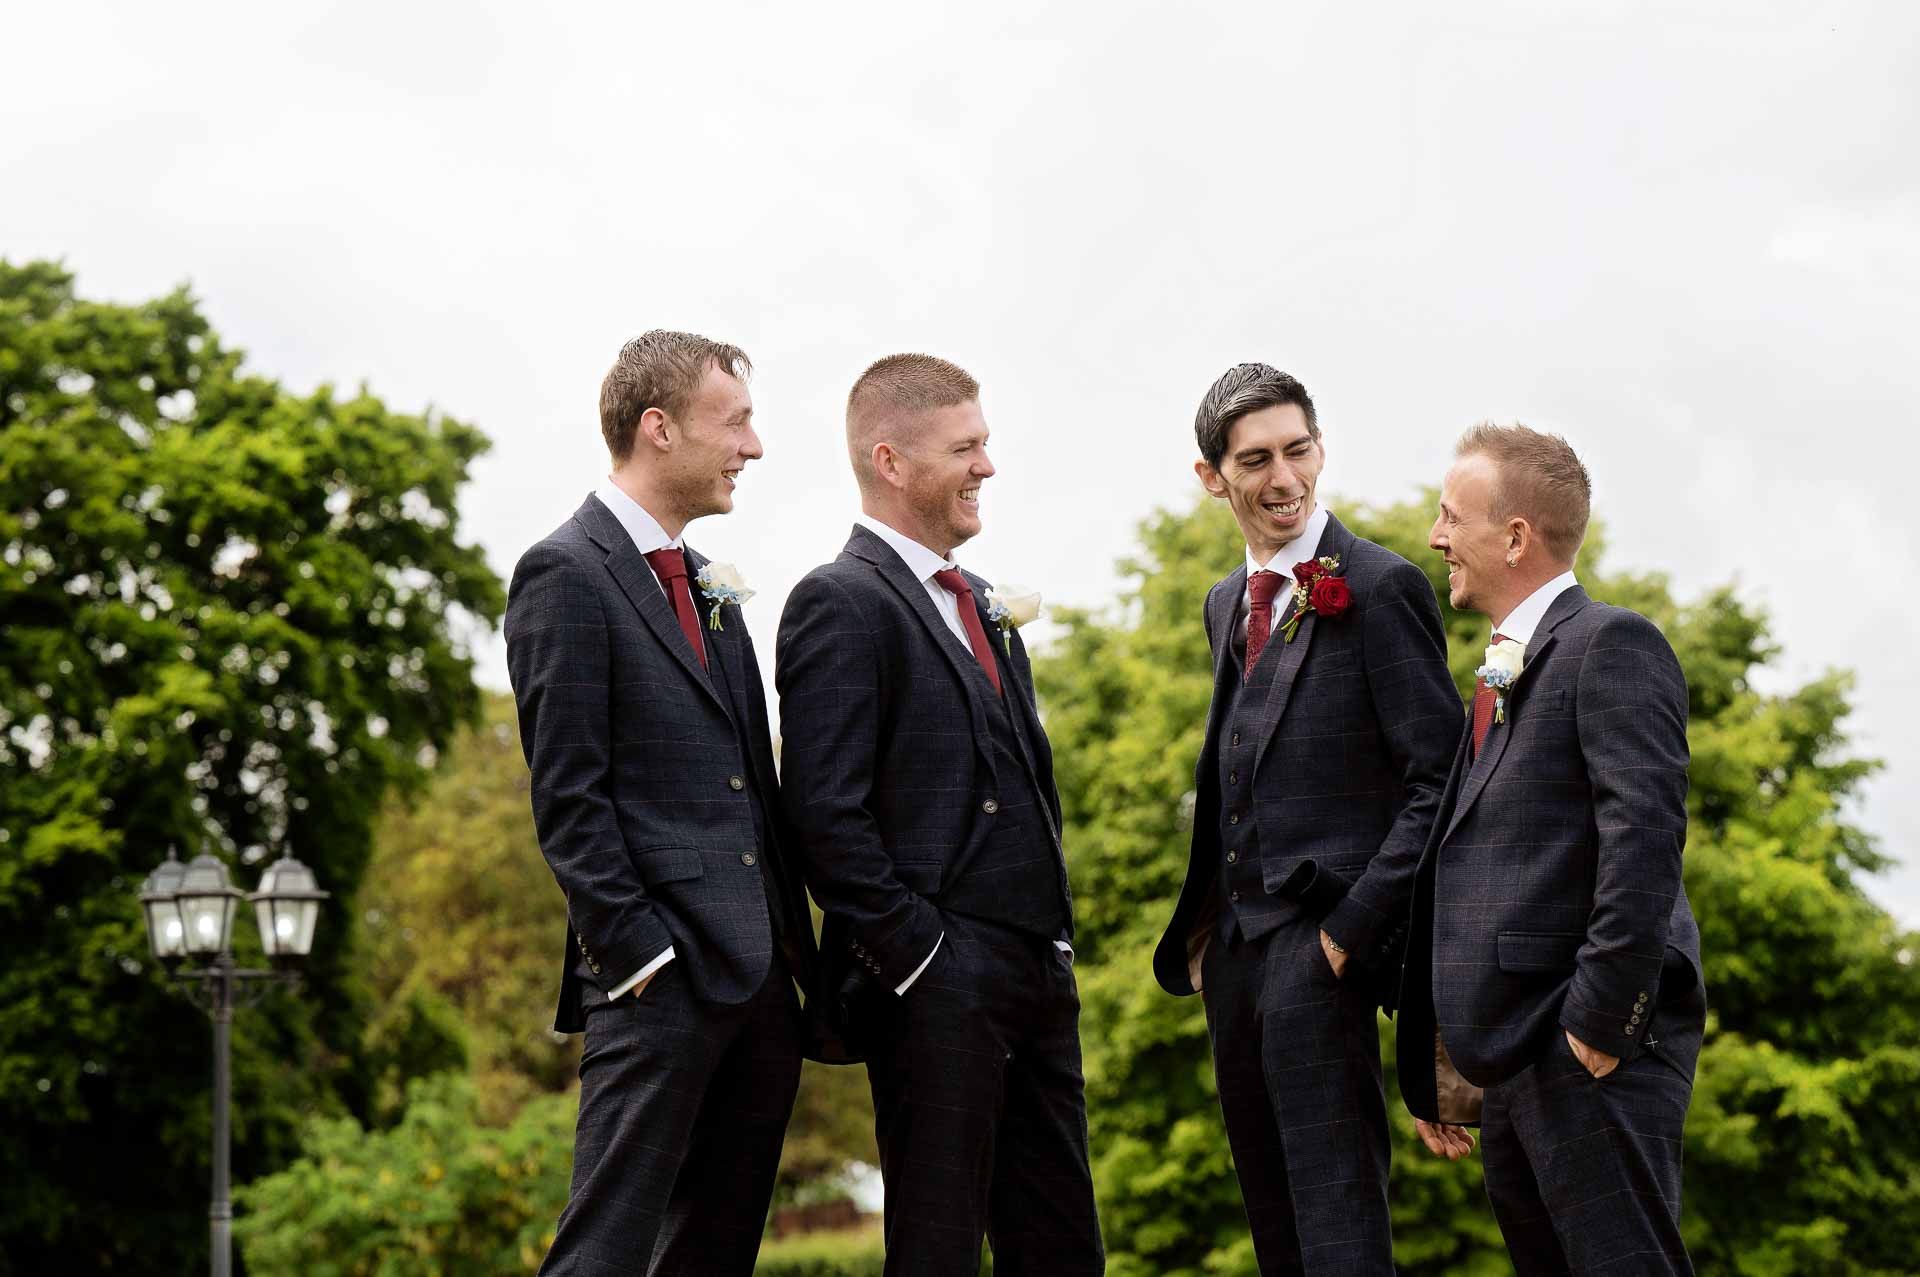 Ross and his groomsmen laughing with each other at Swynford Manor. Photography by Fountain Photography. Videography by Veiled Productions.